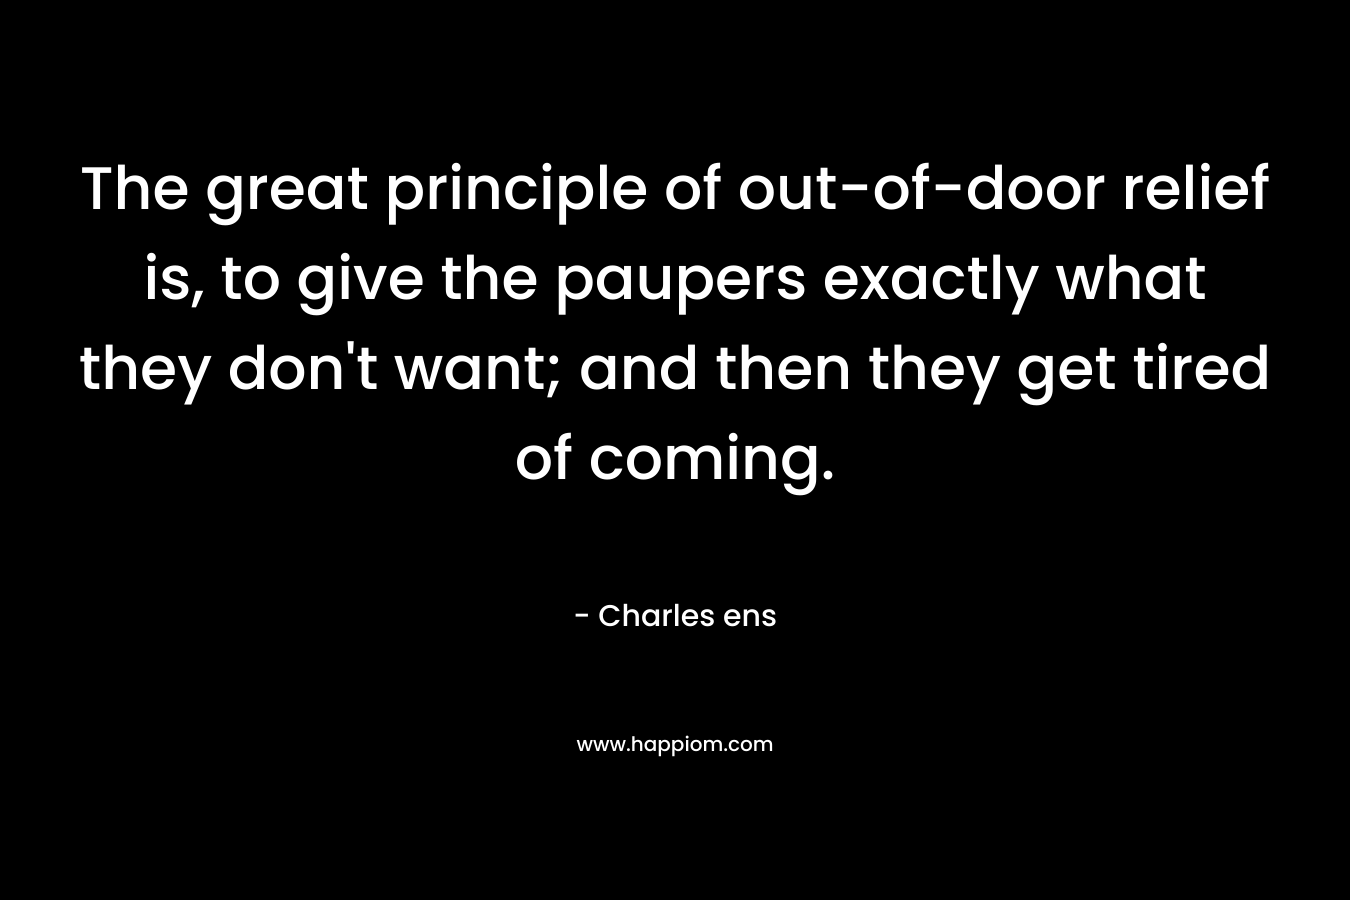 The great principle of out-of-door relief is, to give the paupers exactly what they don’t want; and then they get tired of coming. – Charles ens